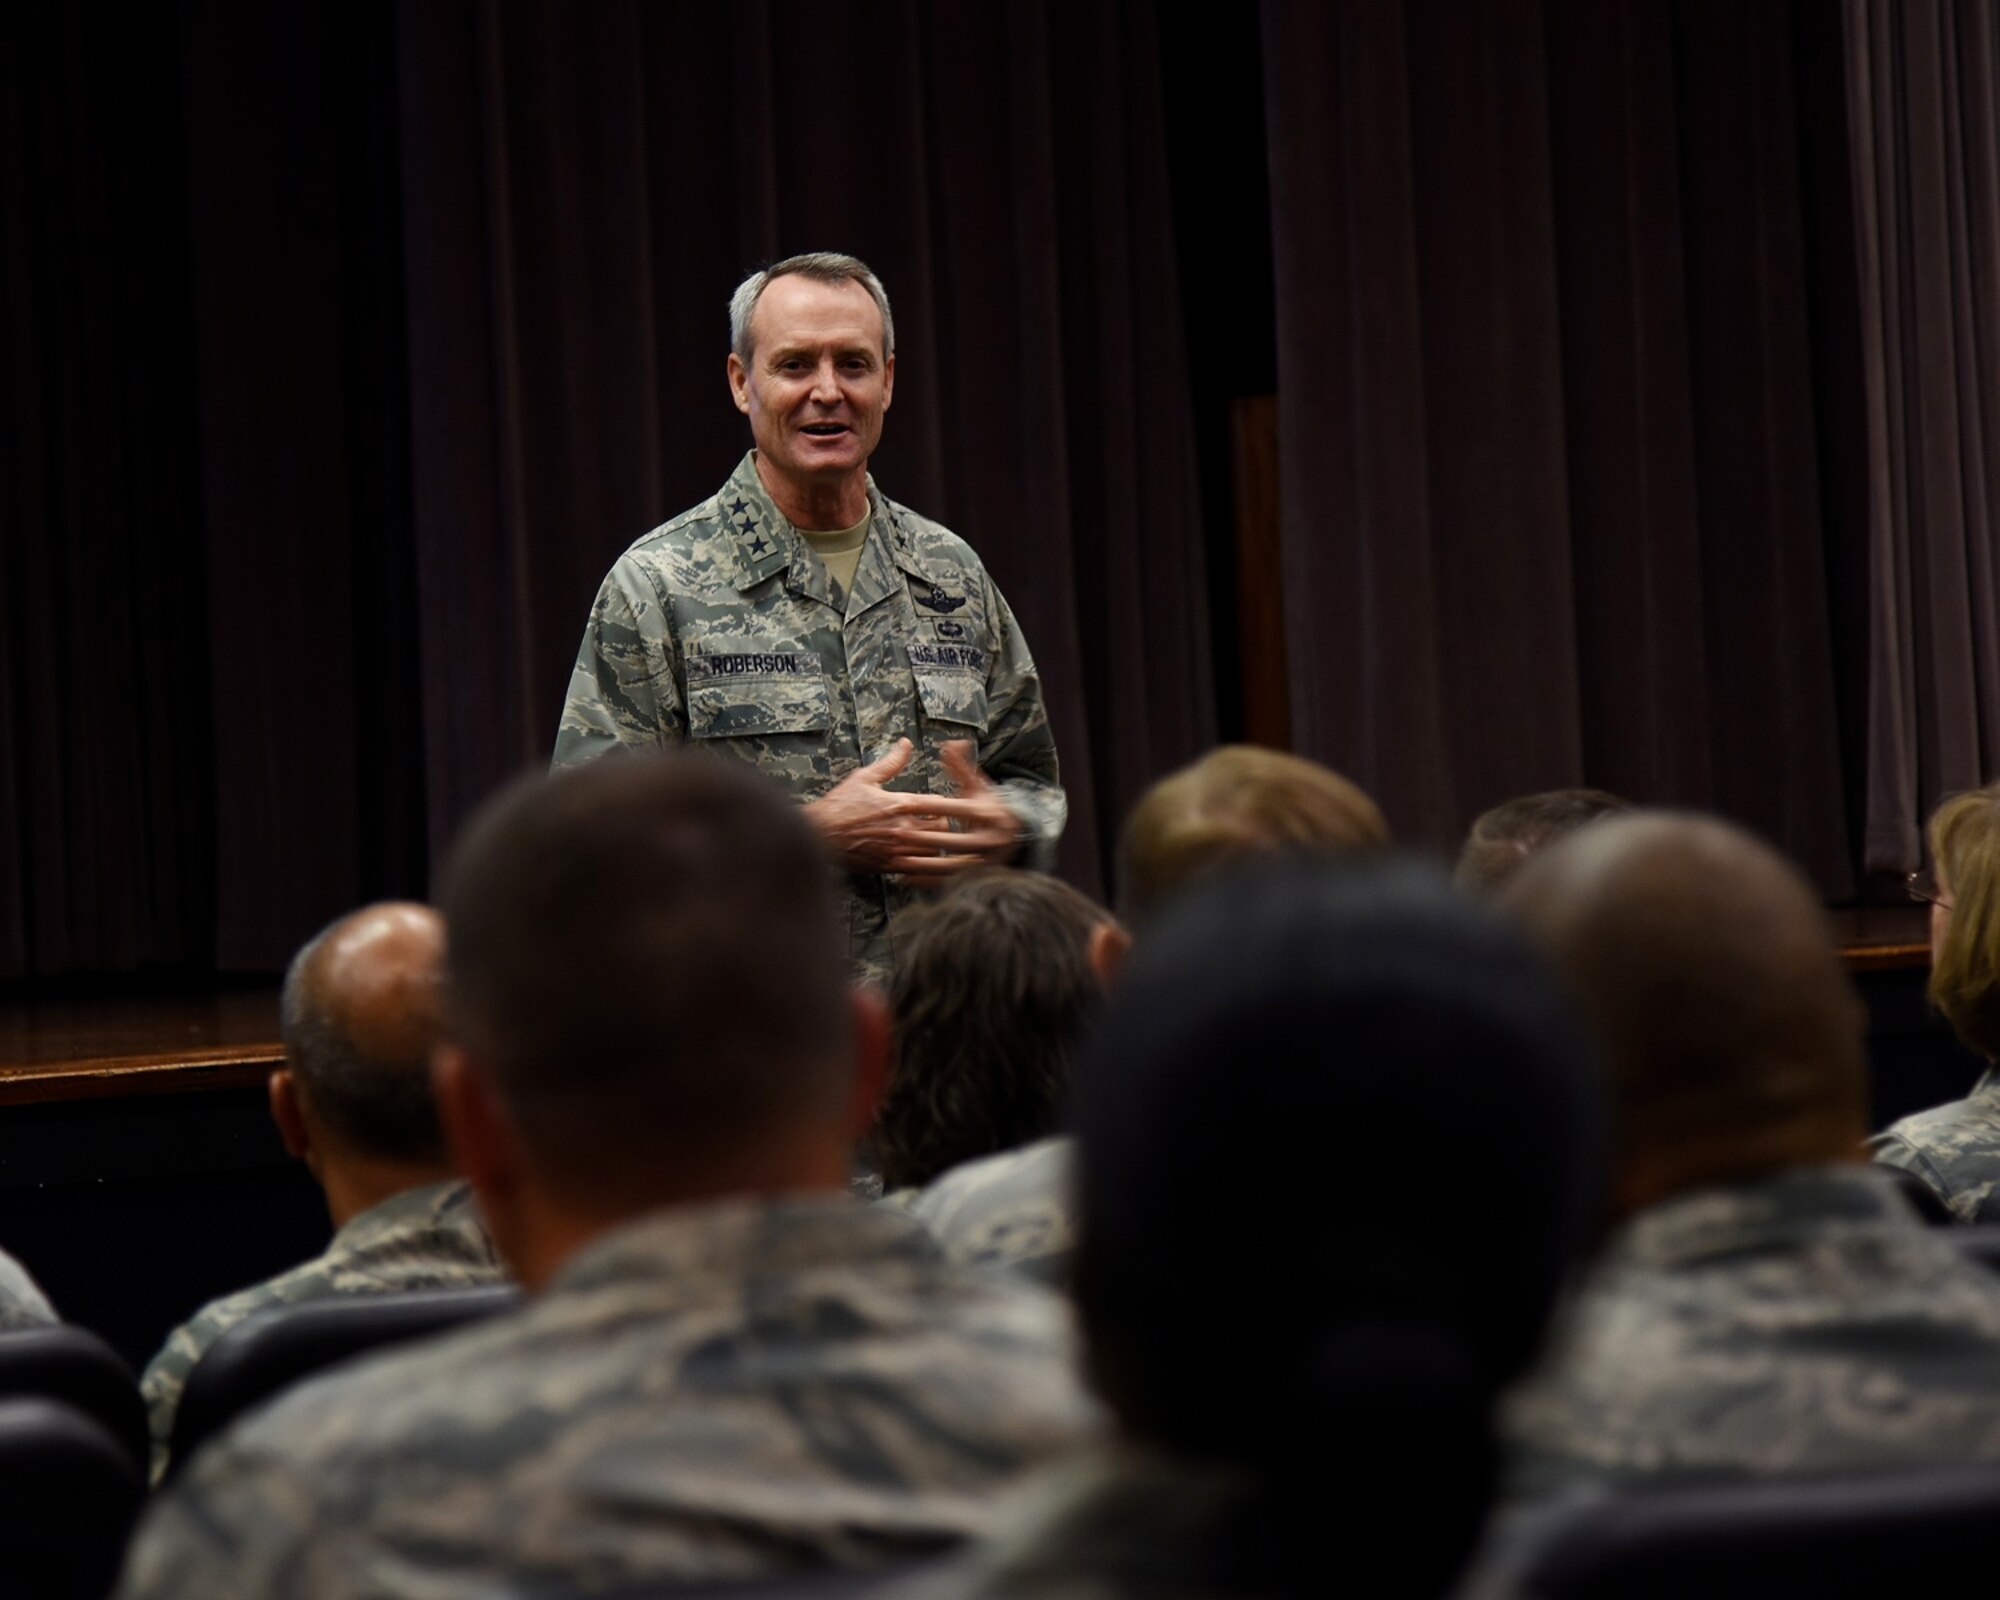 Lt. Gen. Darryl L. Roberson, commander of Air Education and Training Command, speaks with 14th Flying Training Wing leadership during an AETC Senior Leader All-Call Oct. 5, 2017, on Columbus Air Force Base, Mississippi. Roberson and AETC Command Chief Master Sergeant Juliet C. Gudgel spoke about future changes and ideas that can be implemented throughout their bases, groups and squadrons to more efficiently lead their students and Airmen.